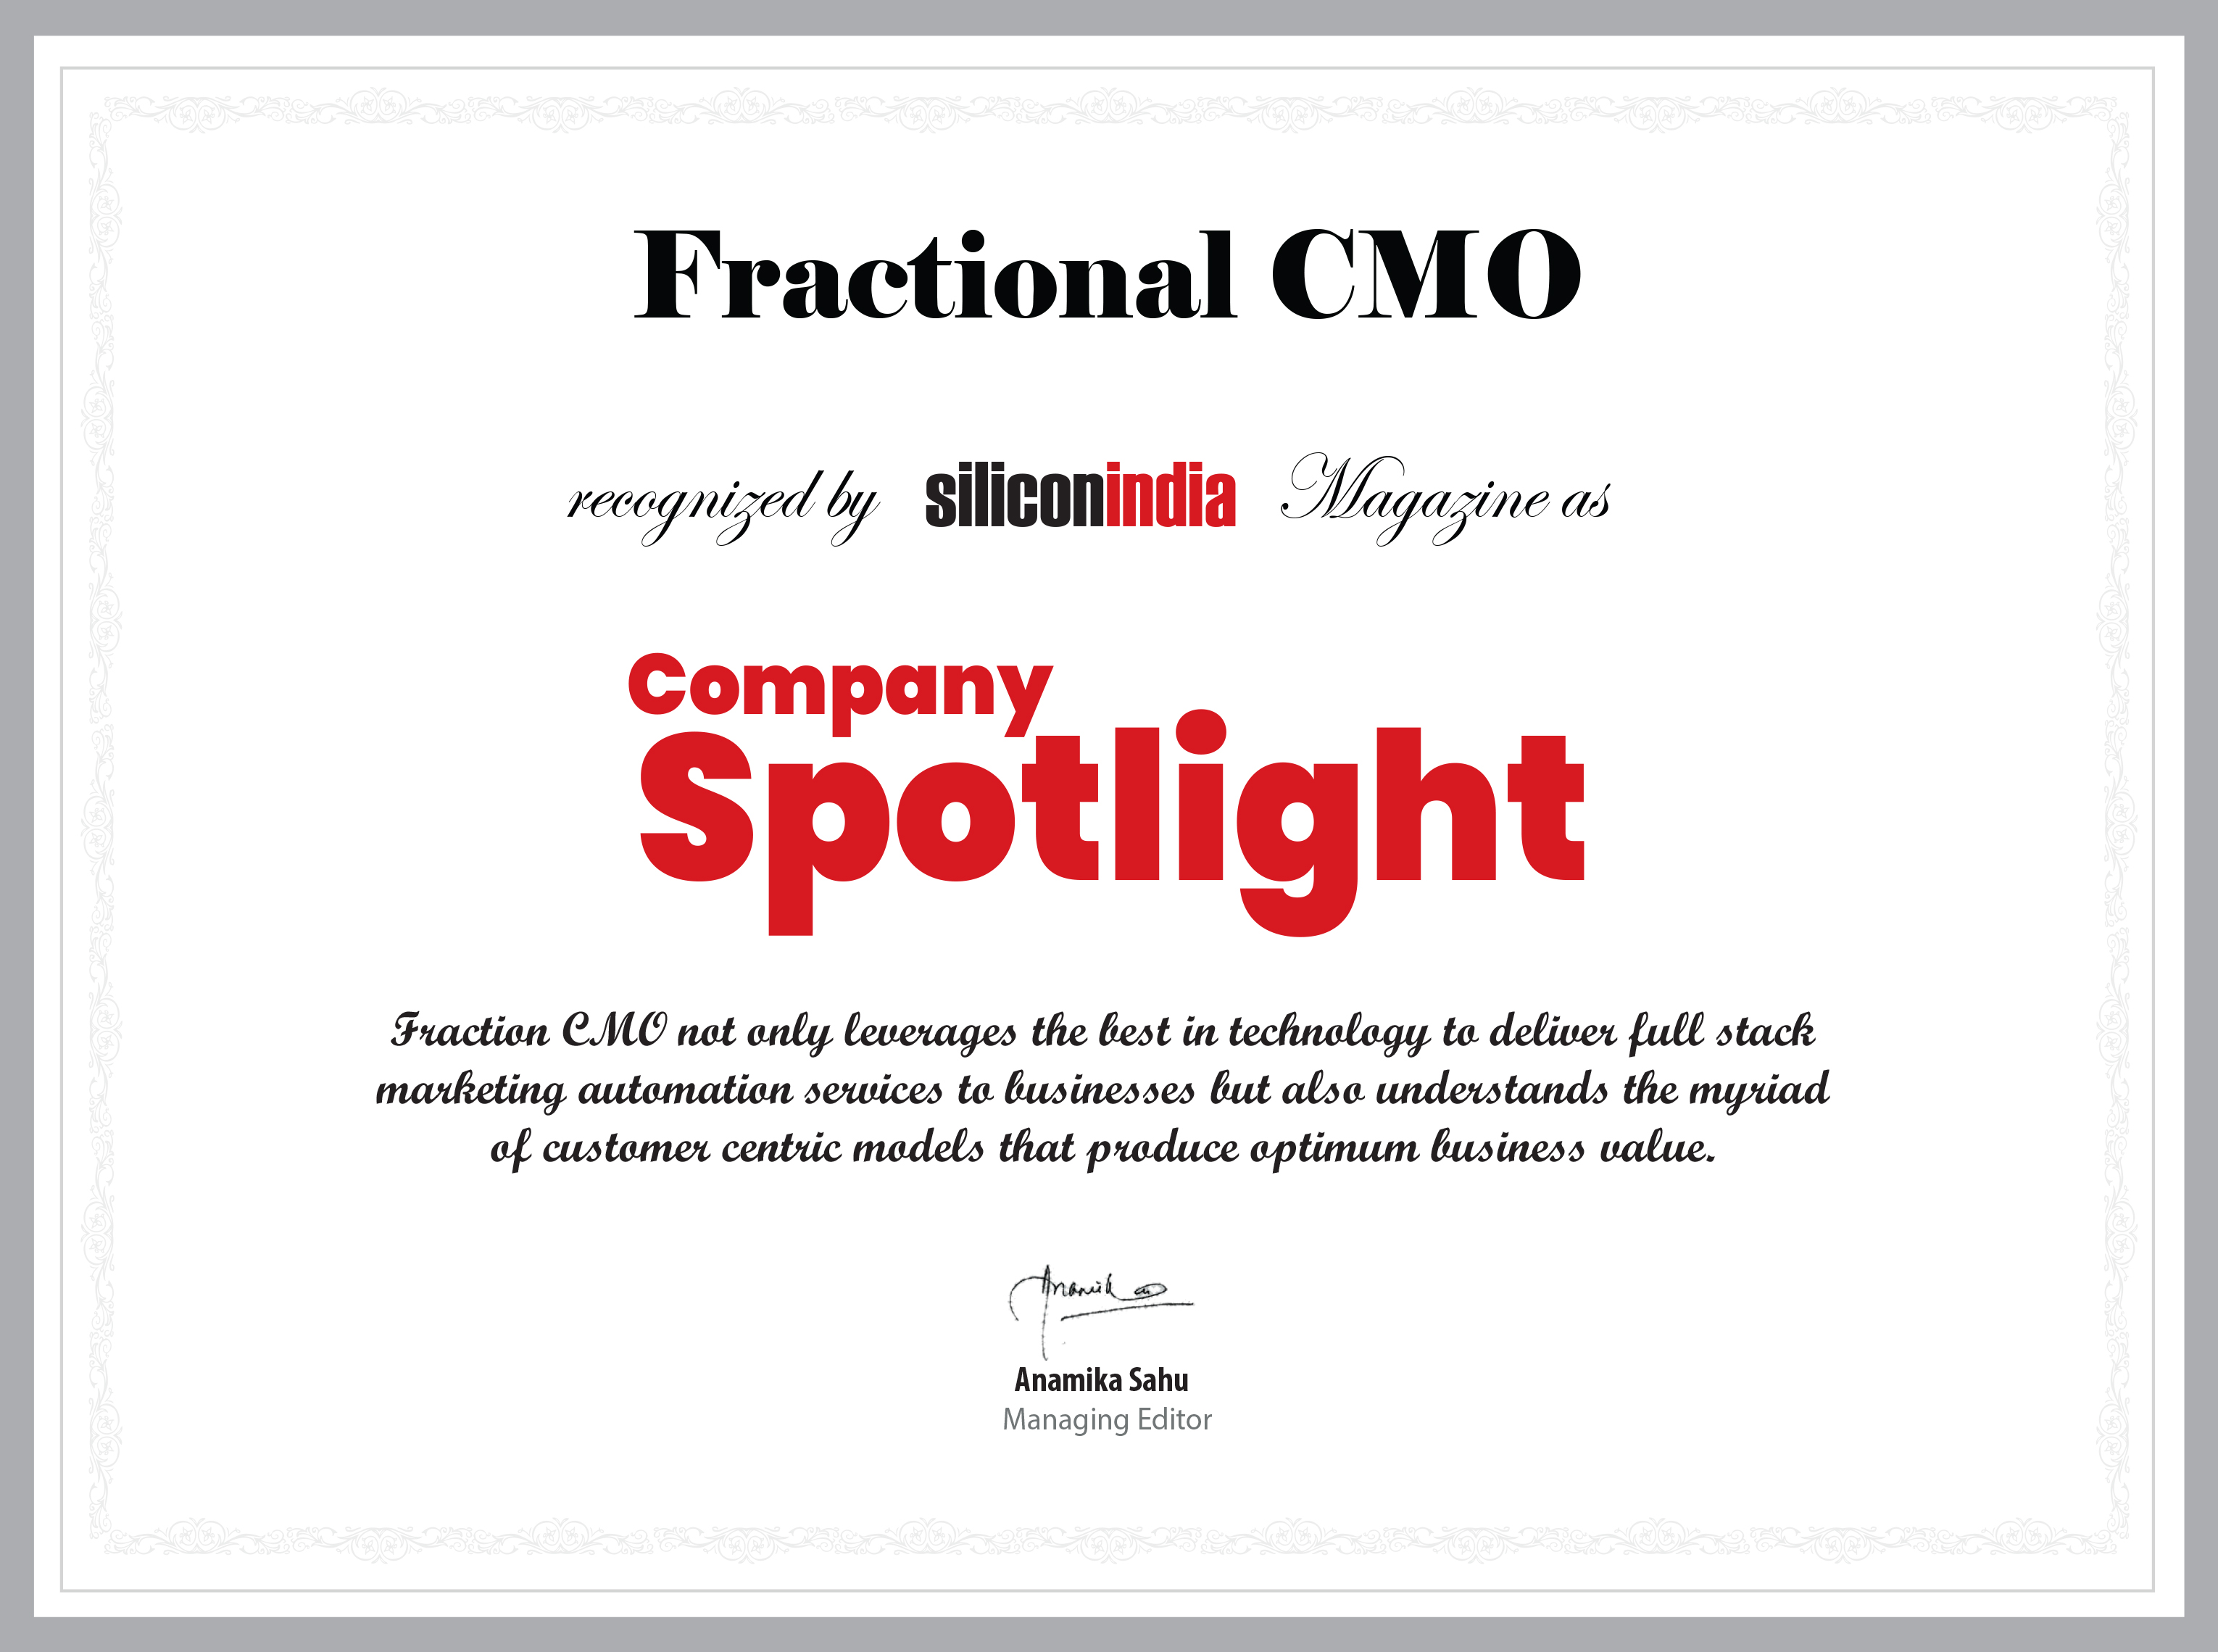 Fractional CMO recognized as '10 Most Promising HubSpot Partners from India  - 2020' by Silicon India